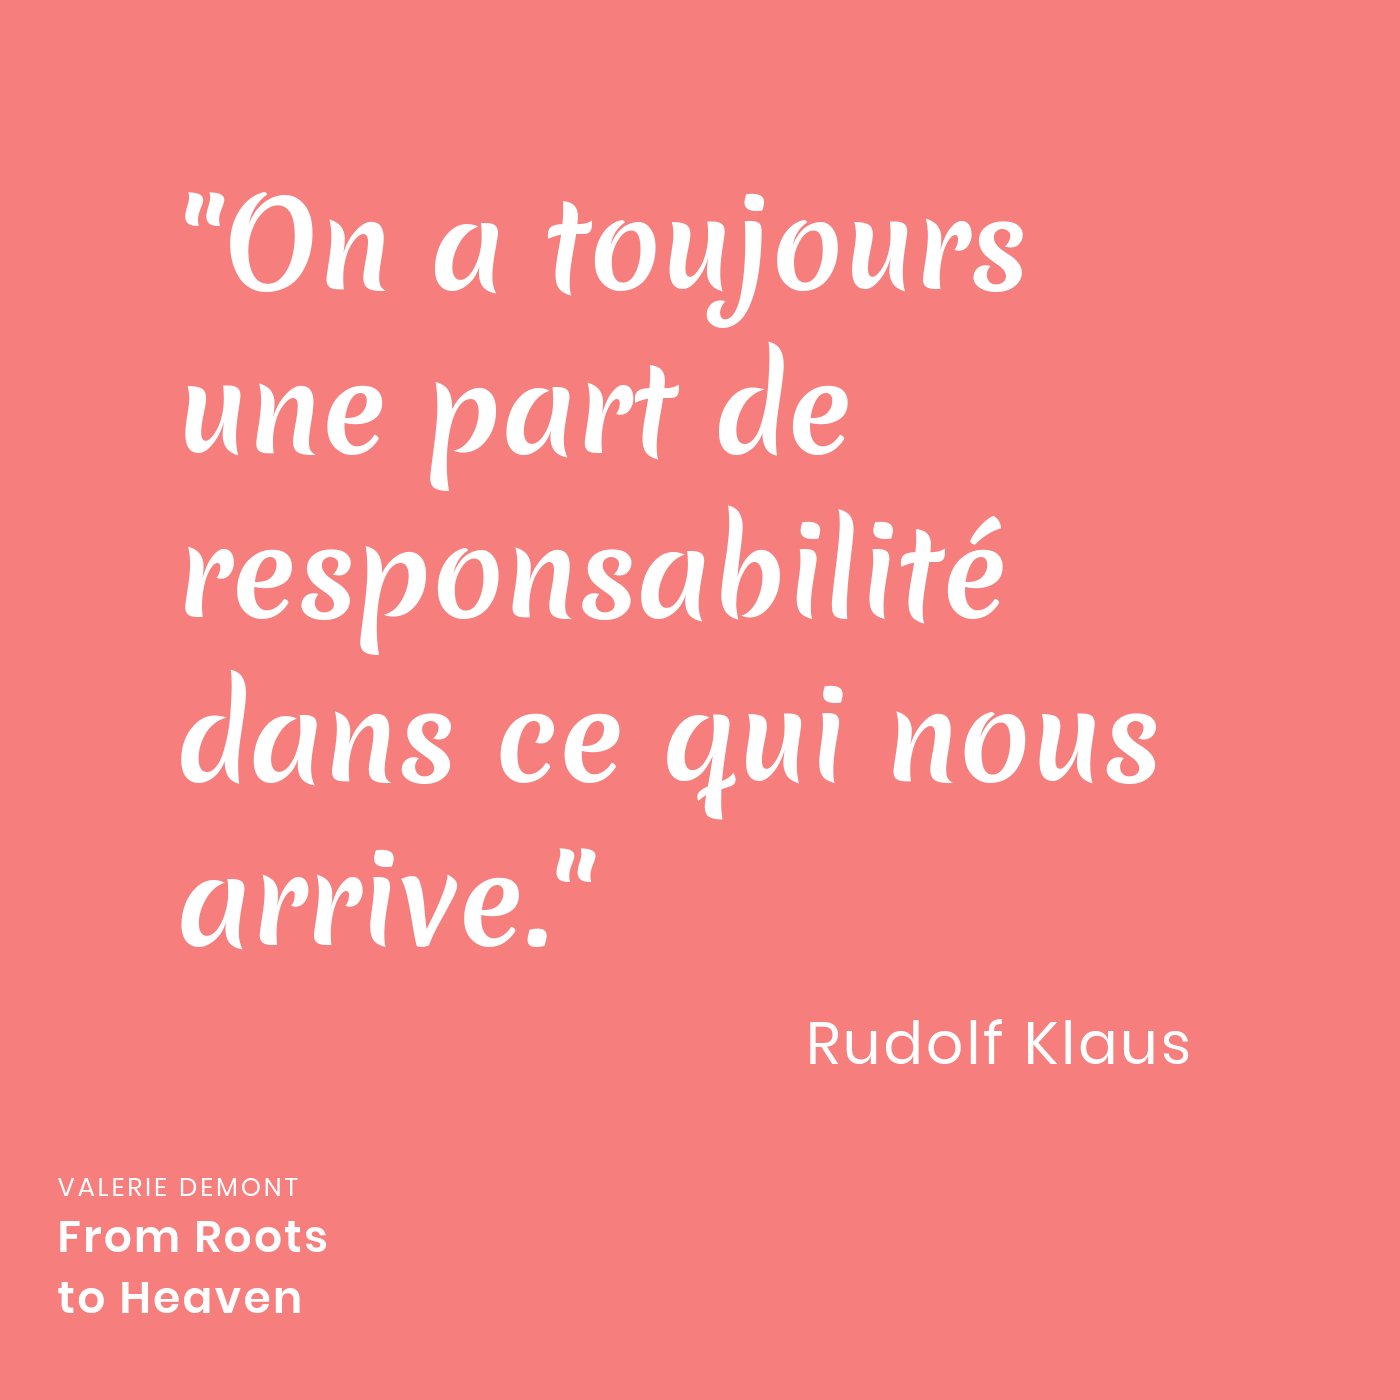 Citation Rudolf Klaus from Roots to Heaven podcast valerie demont